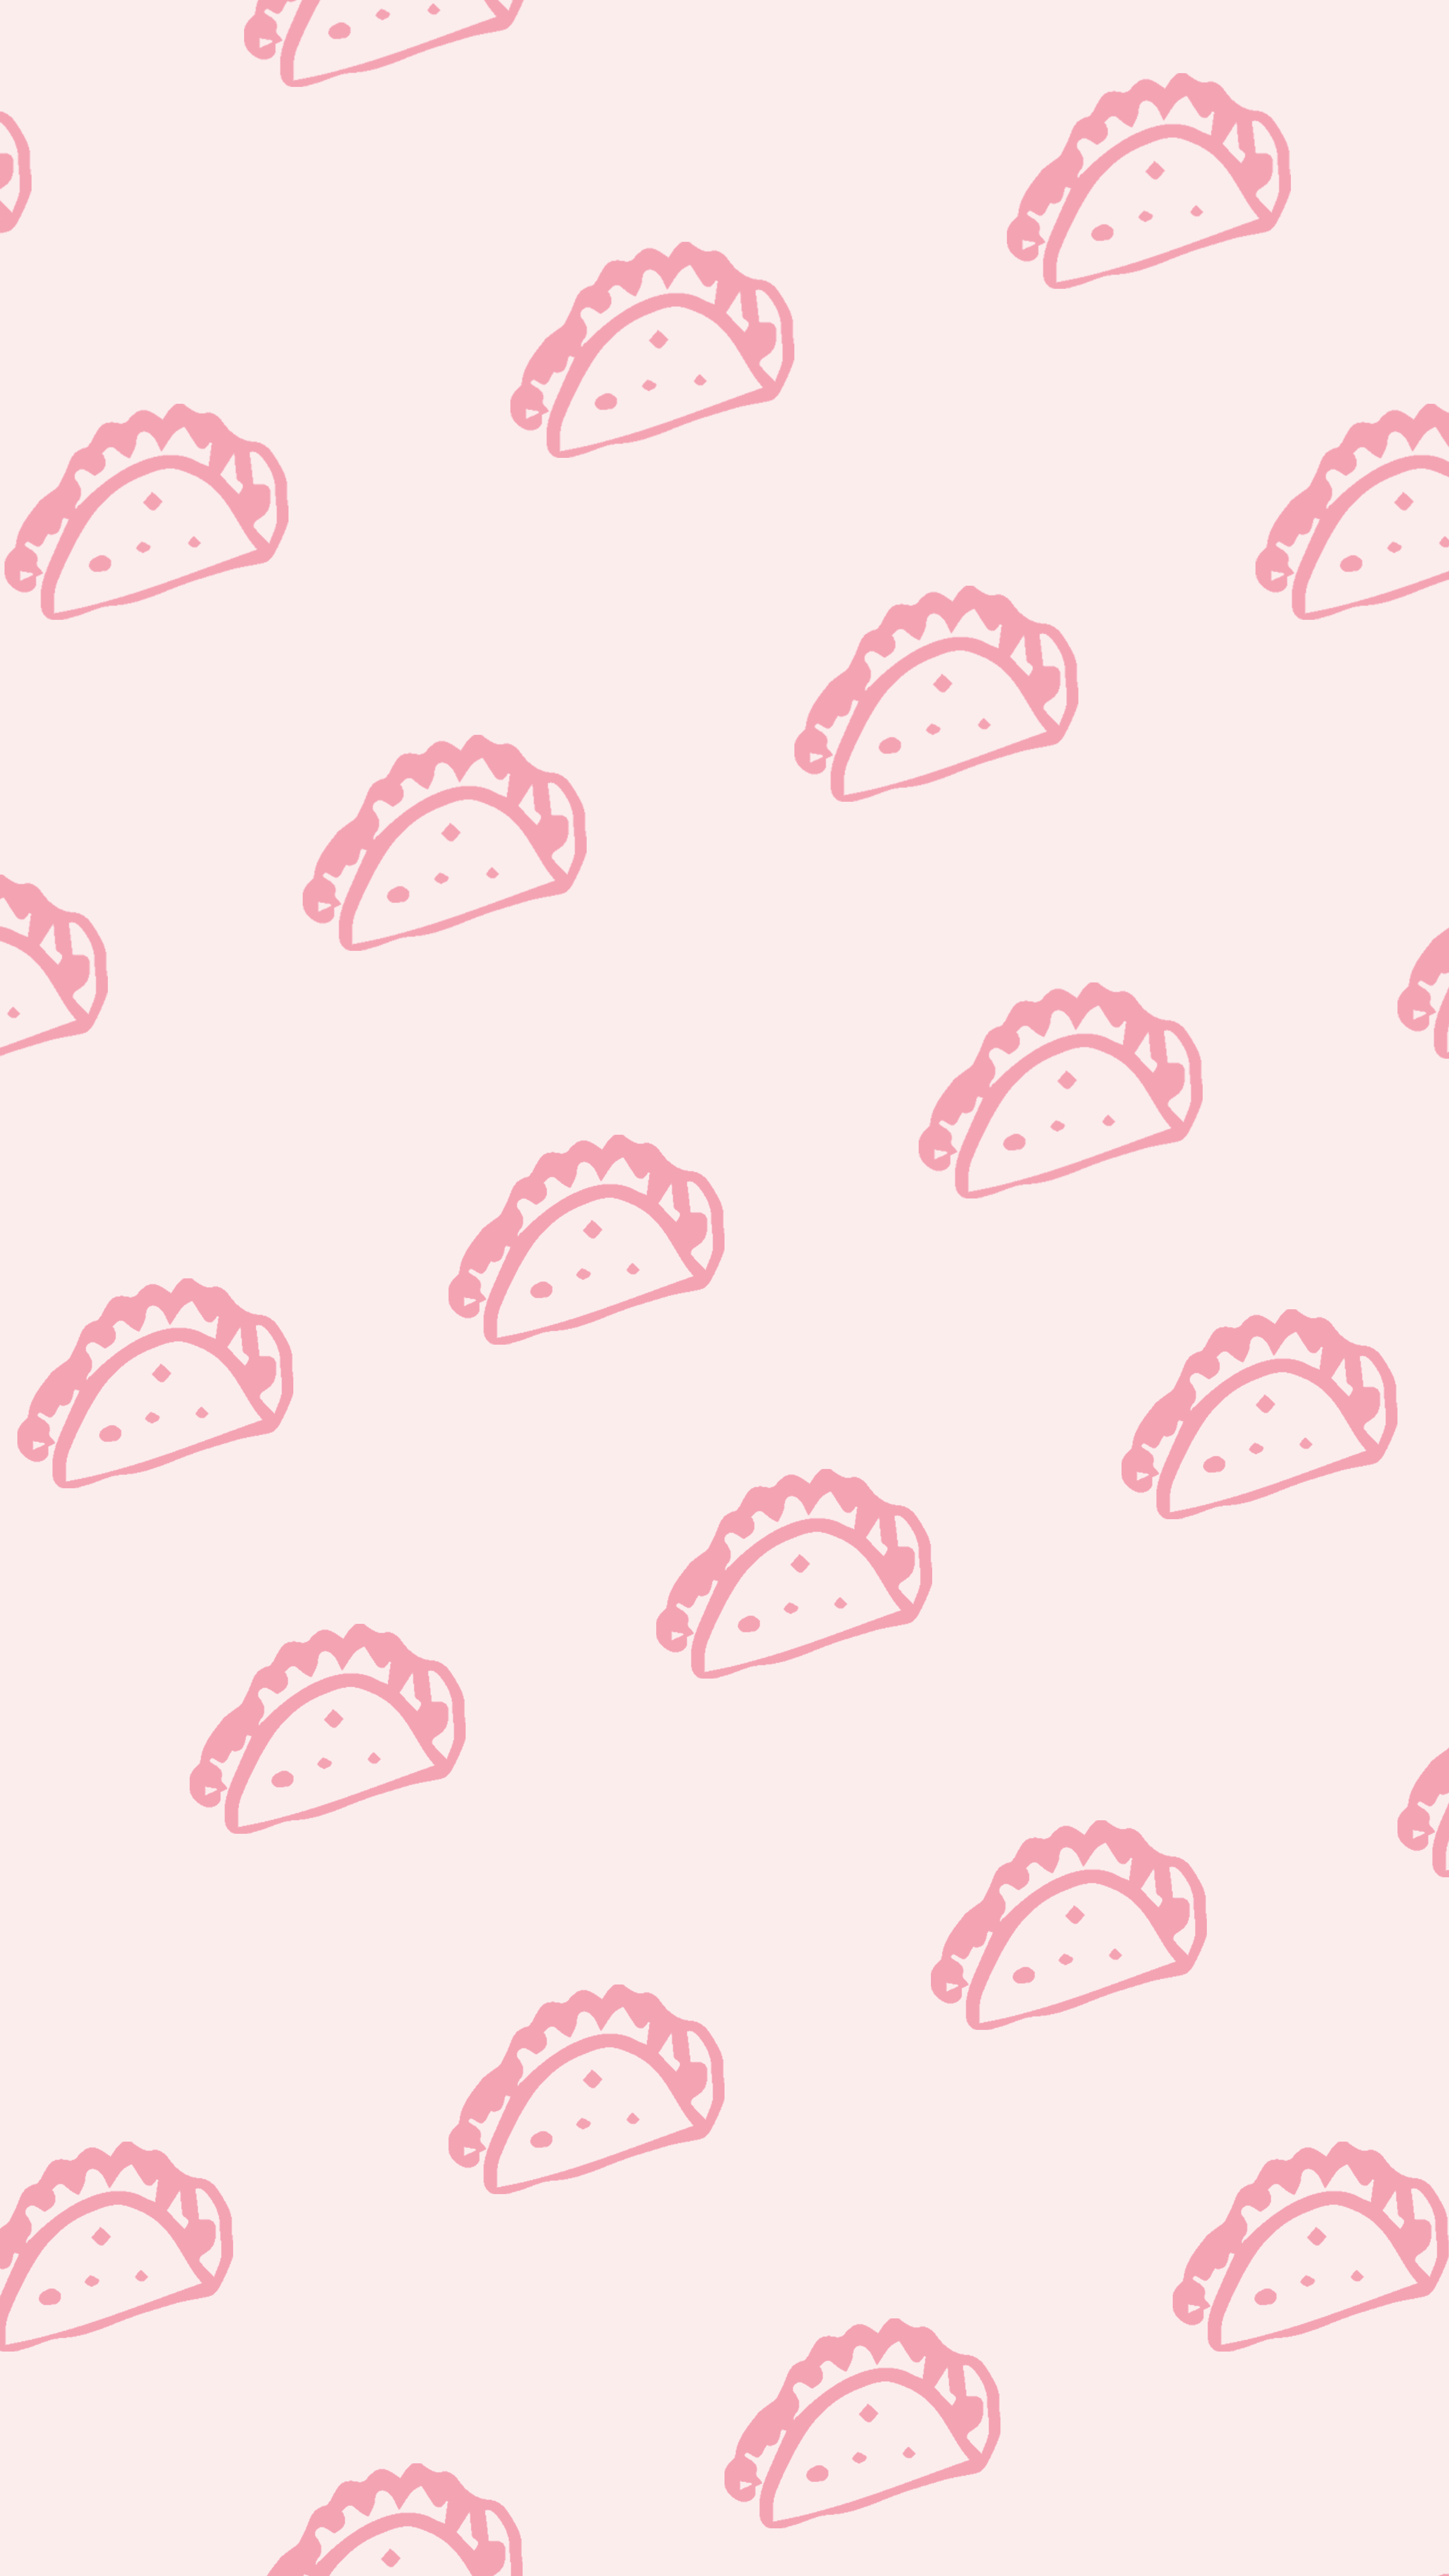 National Taco Day and National Vodka Day Wallpaper. Taco wallpaper, Taco background wallpaper, Wallpaper